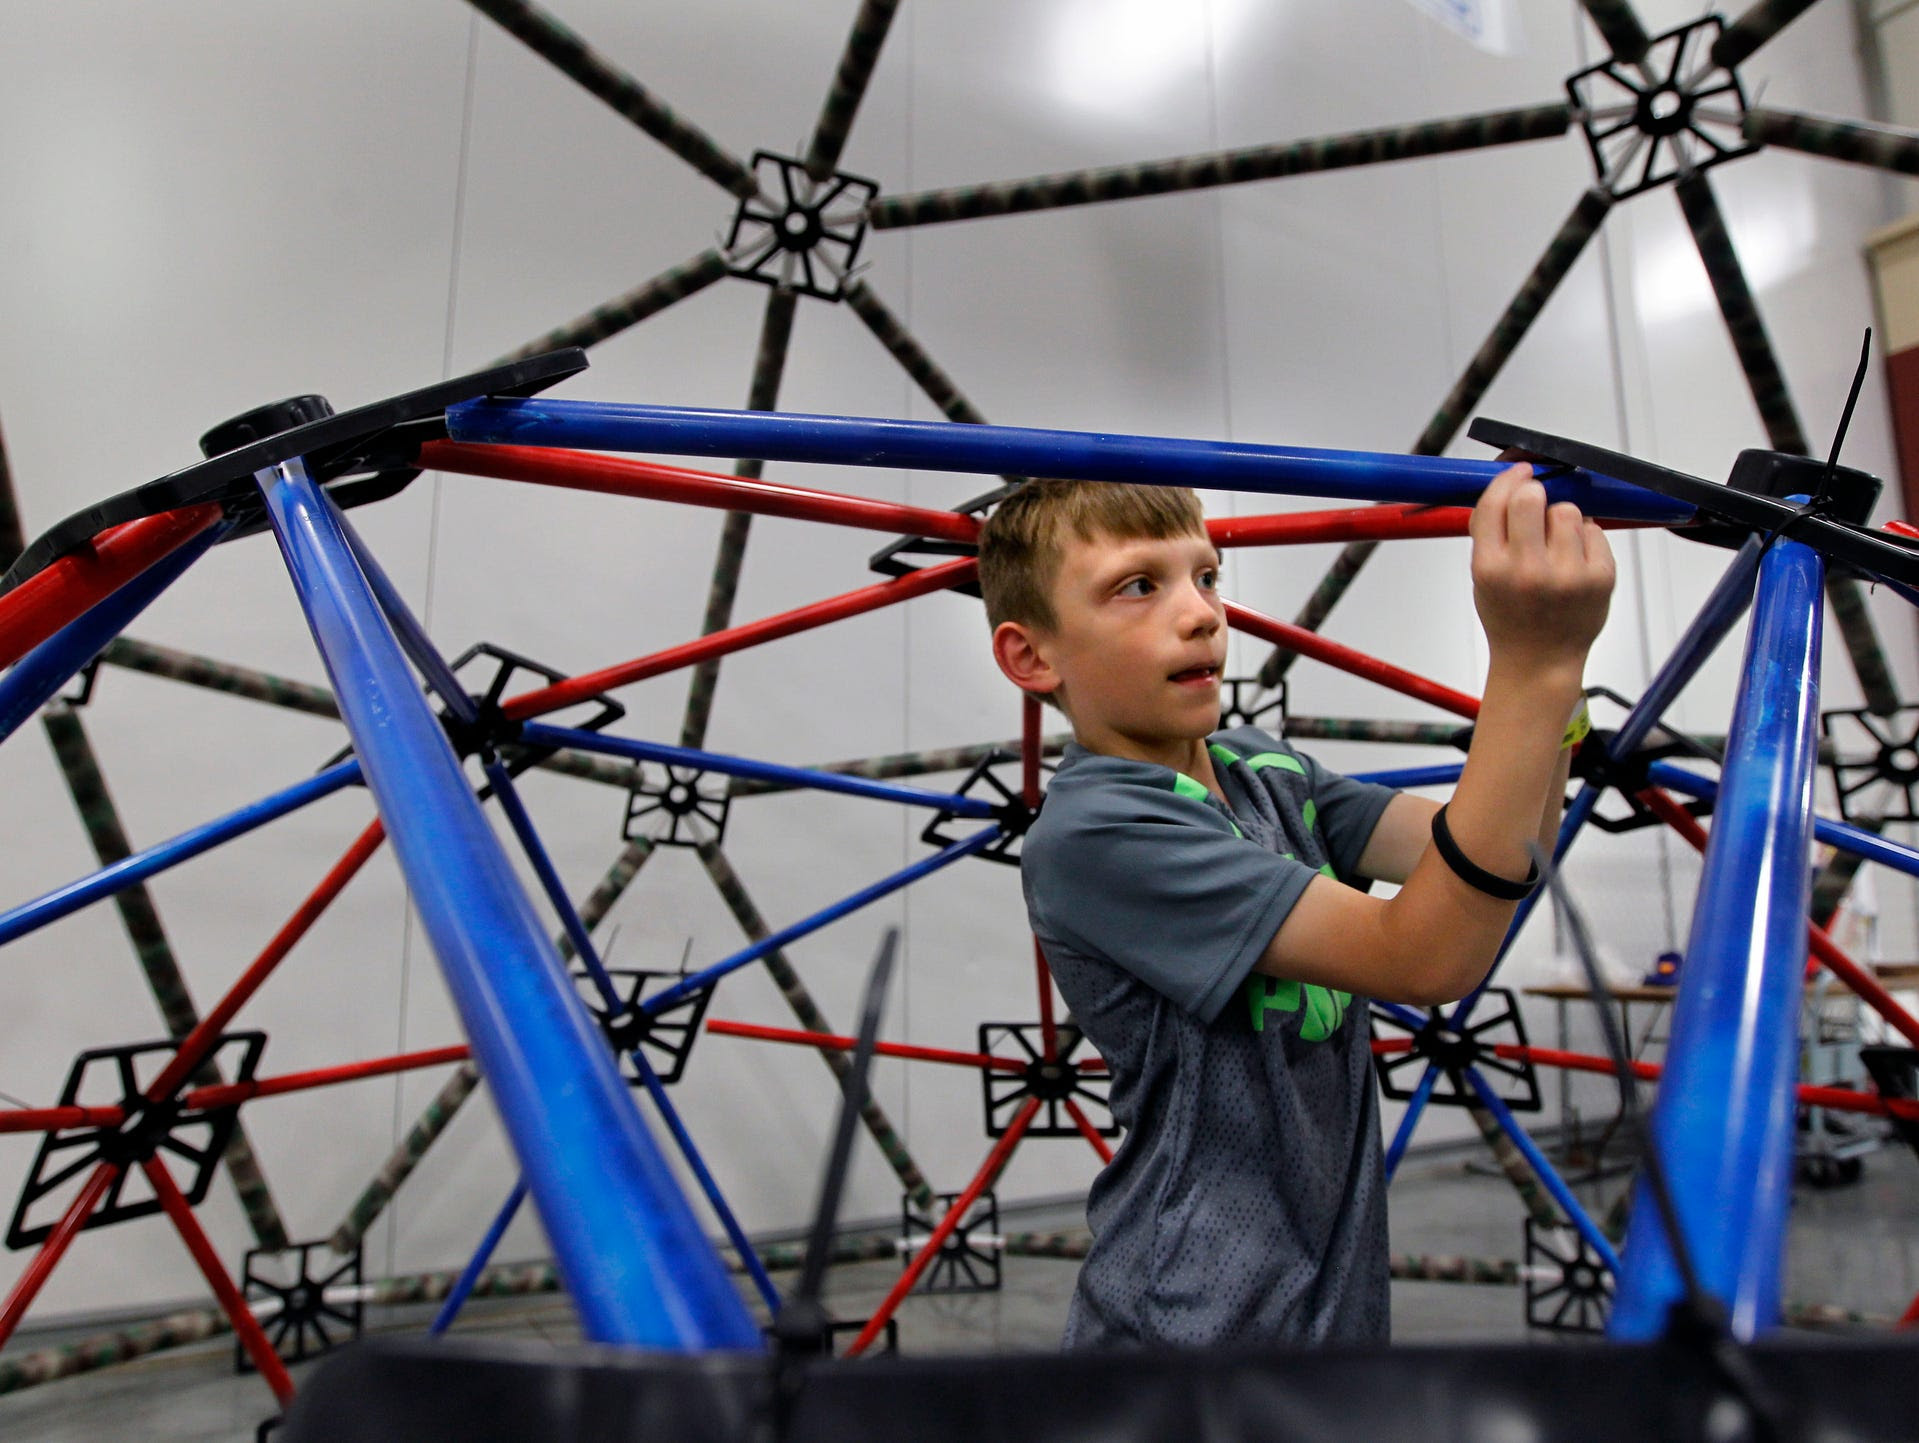 Josh Larsen, 8, of Franklin works in the Geodesic Dome